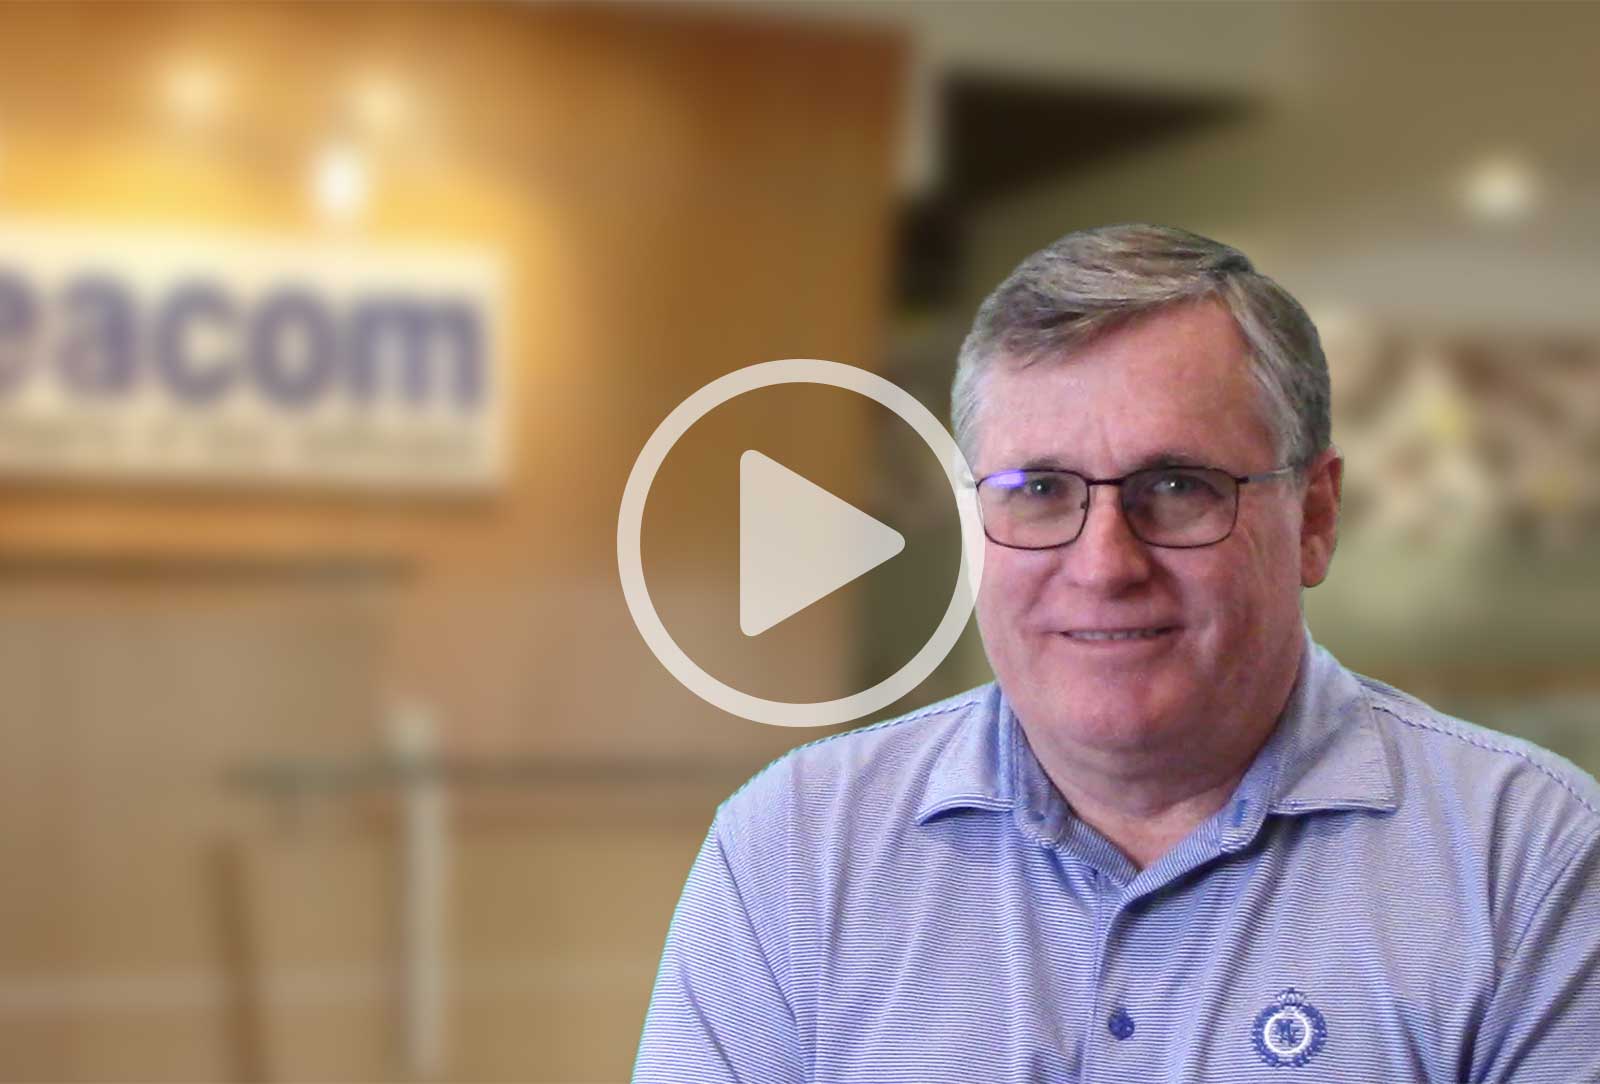 In this brief video, Jim Fragnoli, CFO of California Custom Fruits and Flavors, speaks about Deacom ERP’s intuitiveness which has helped his employees easily adapt to the new system and stronger processes.